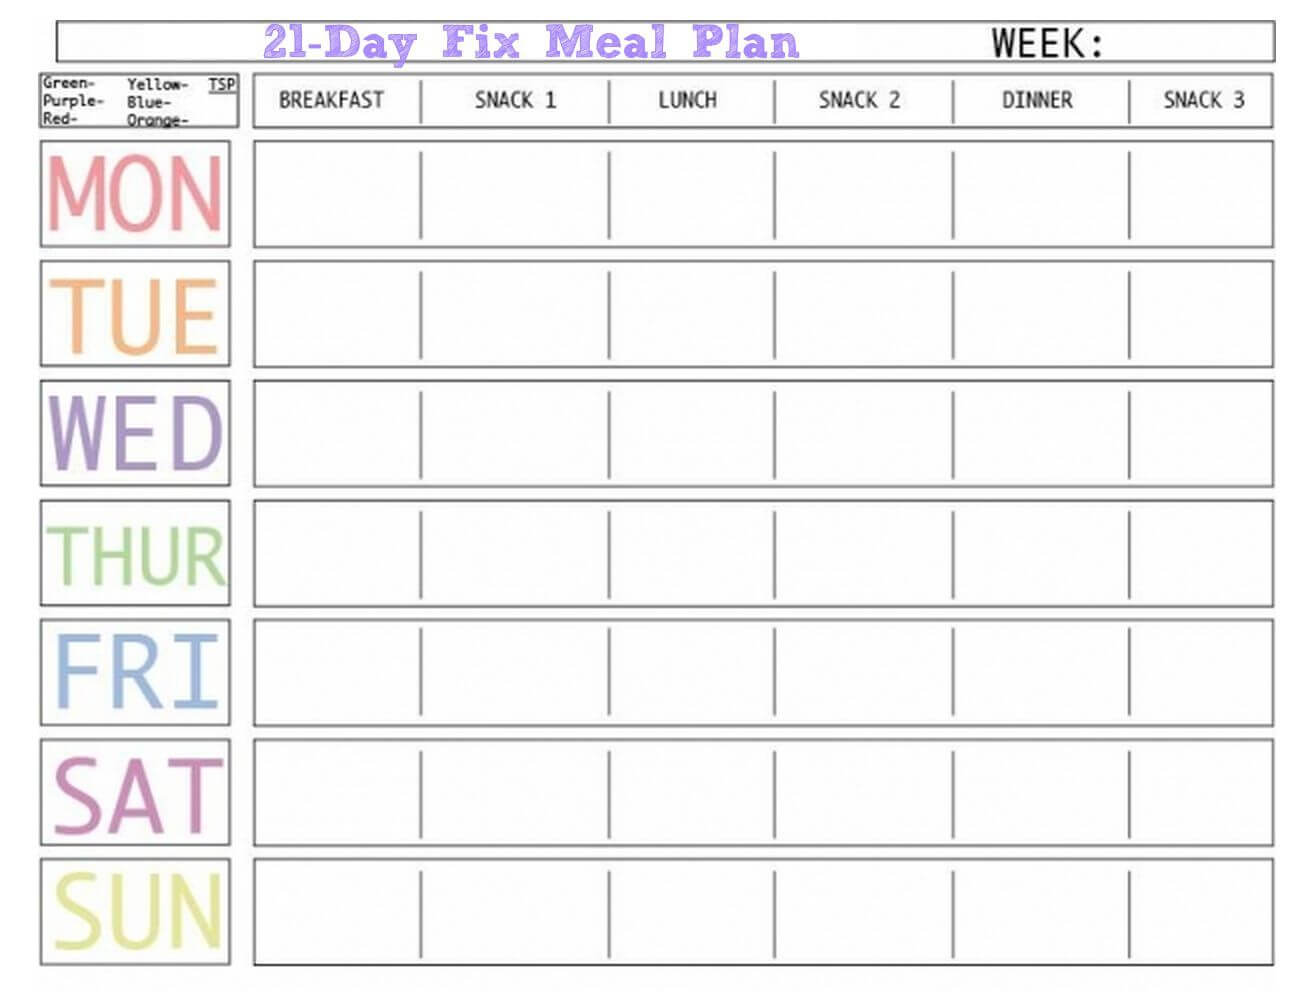 Here Is A Blank Meal Plan Template You Can Use. (Diet Plan Intended For Blank Meal Plan Template